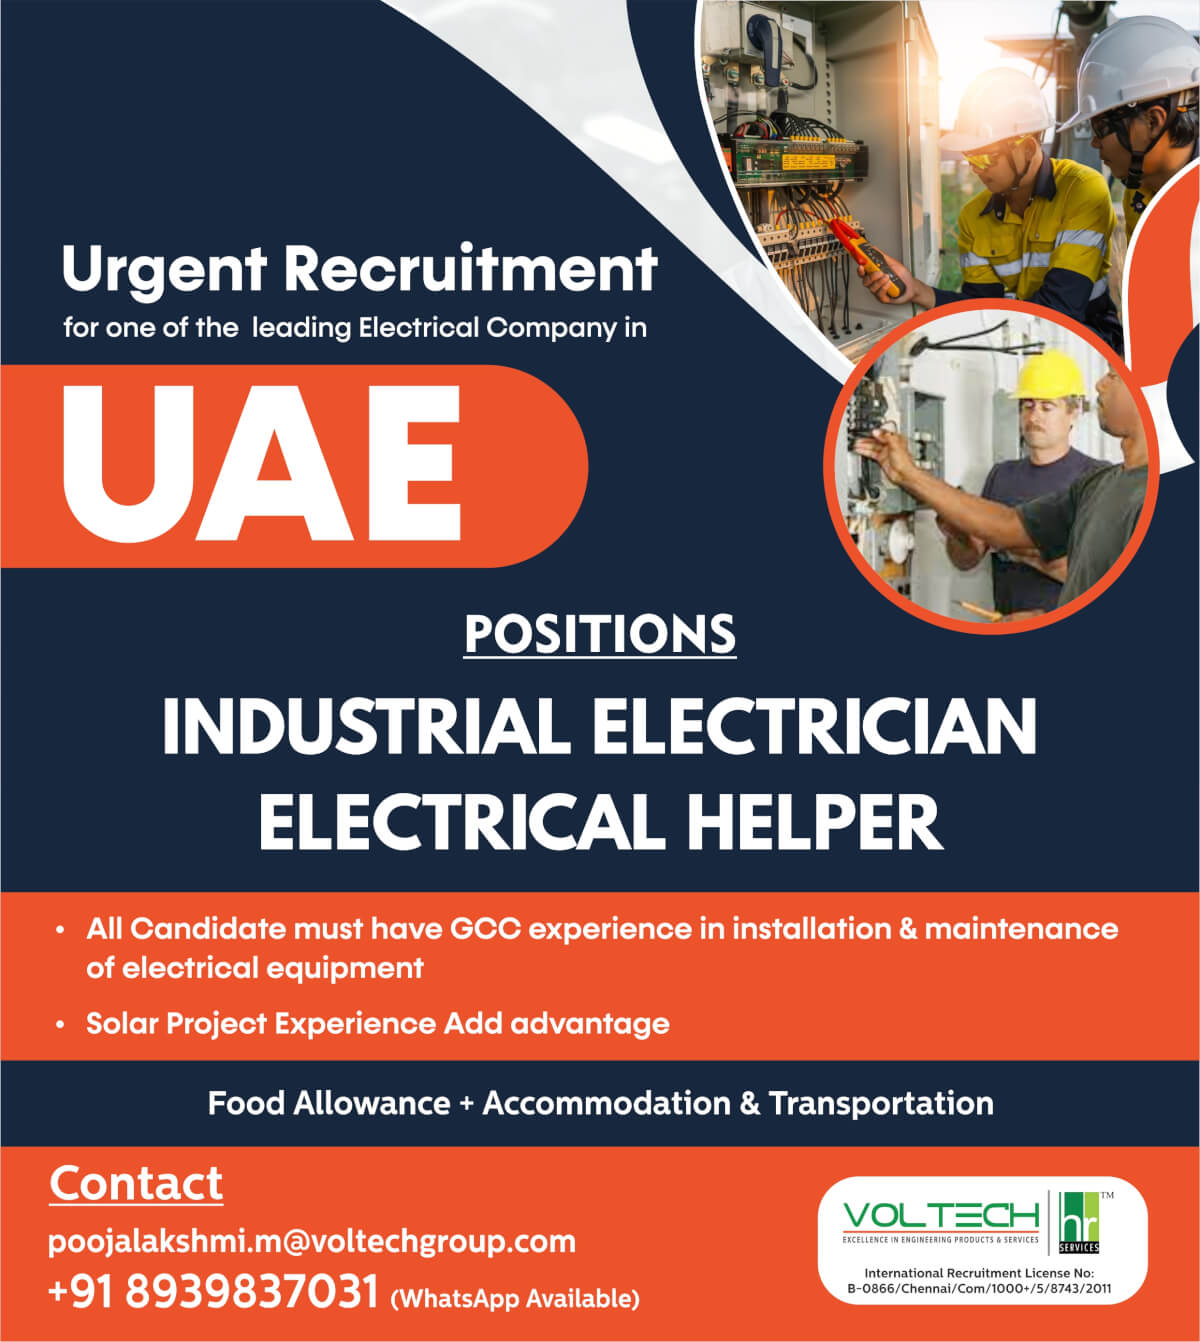 Urgent recruitment for one of the leading Electrical Company in UAE